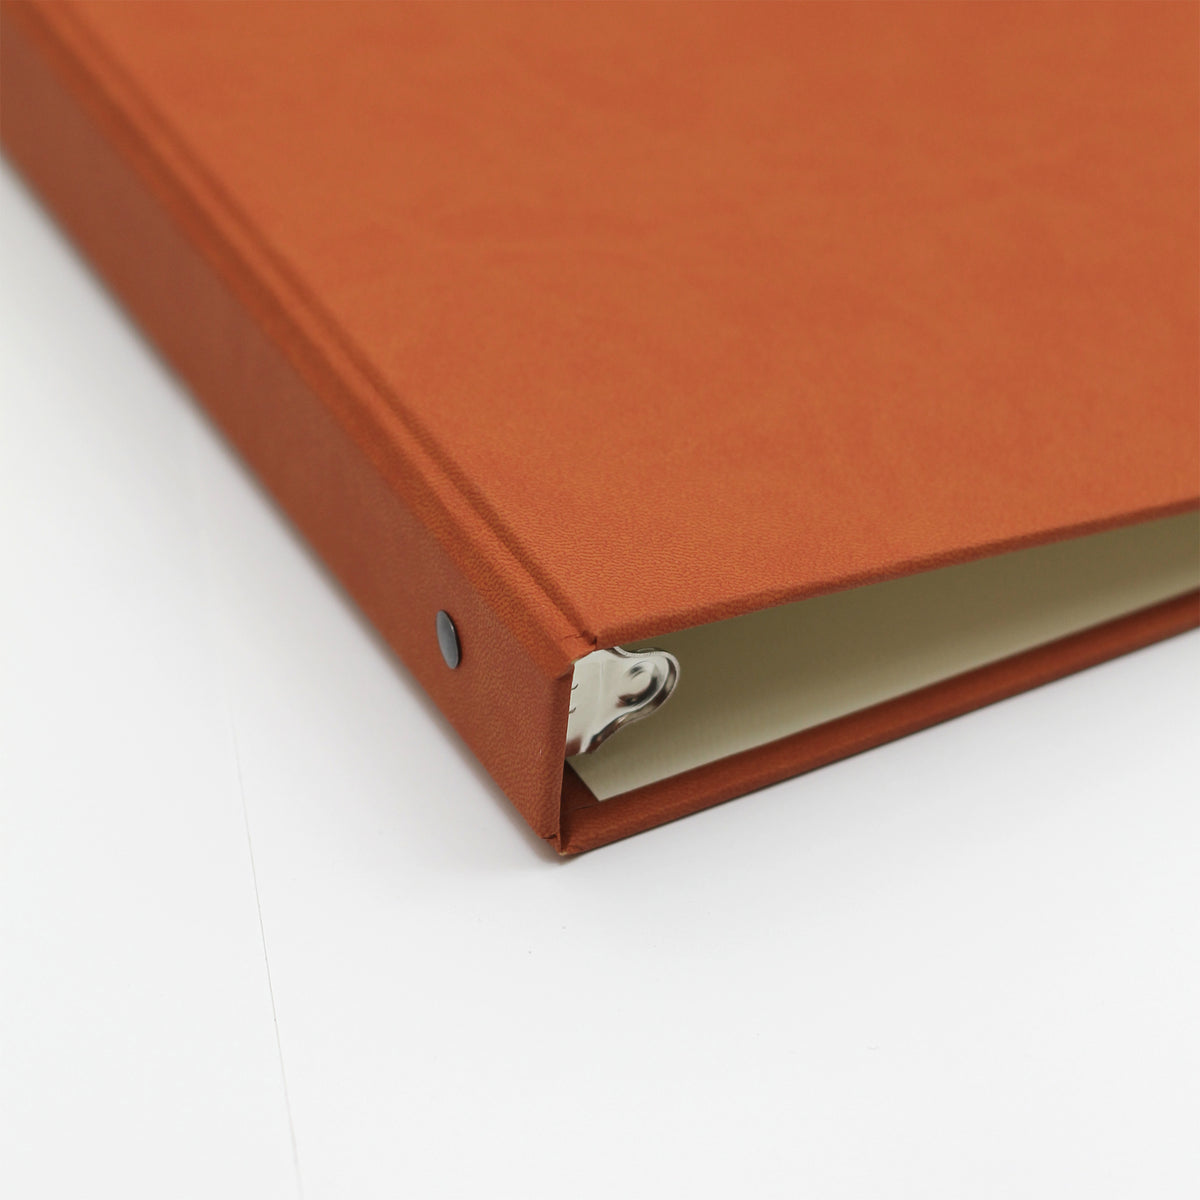 Large Photo Binder For 4x6 Photos | Cover: Terra Cotta Vegan Leather | Available Personalized